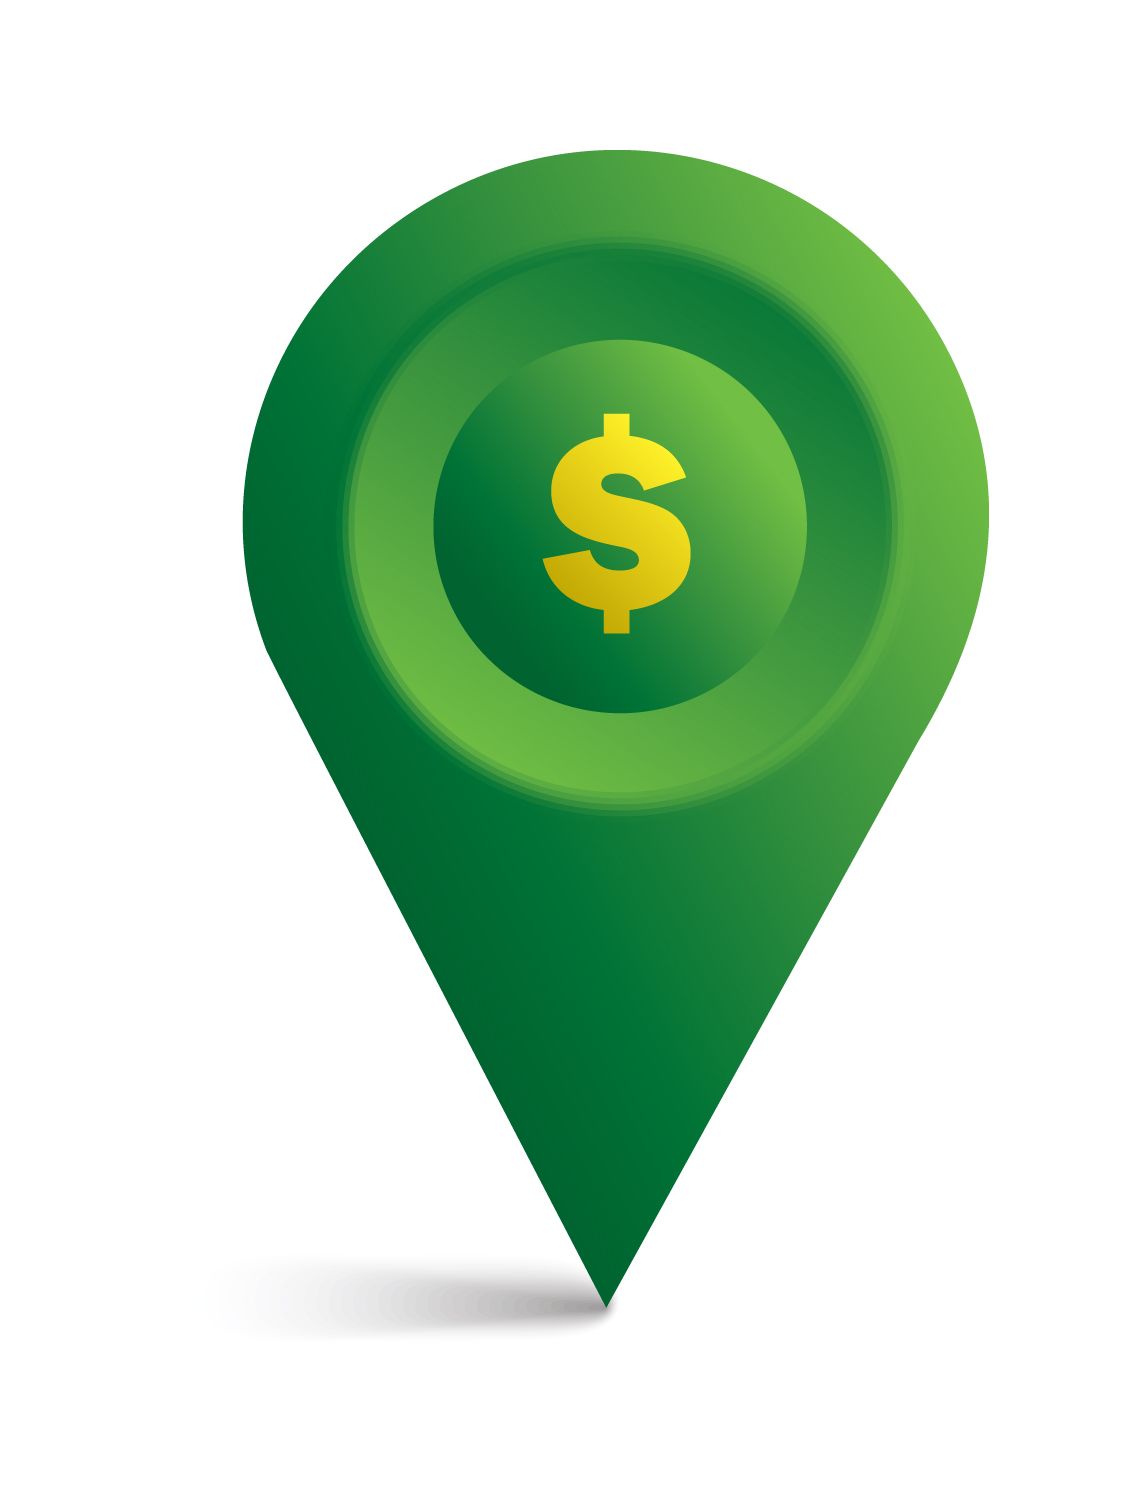 Green location icon with dollar sign